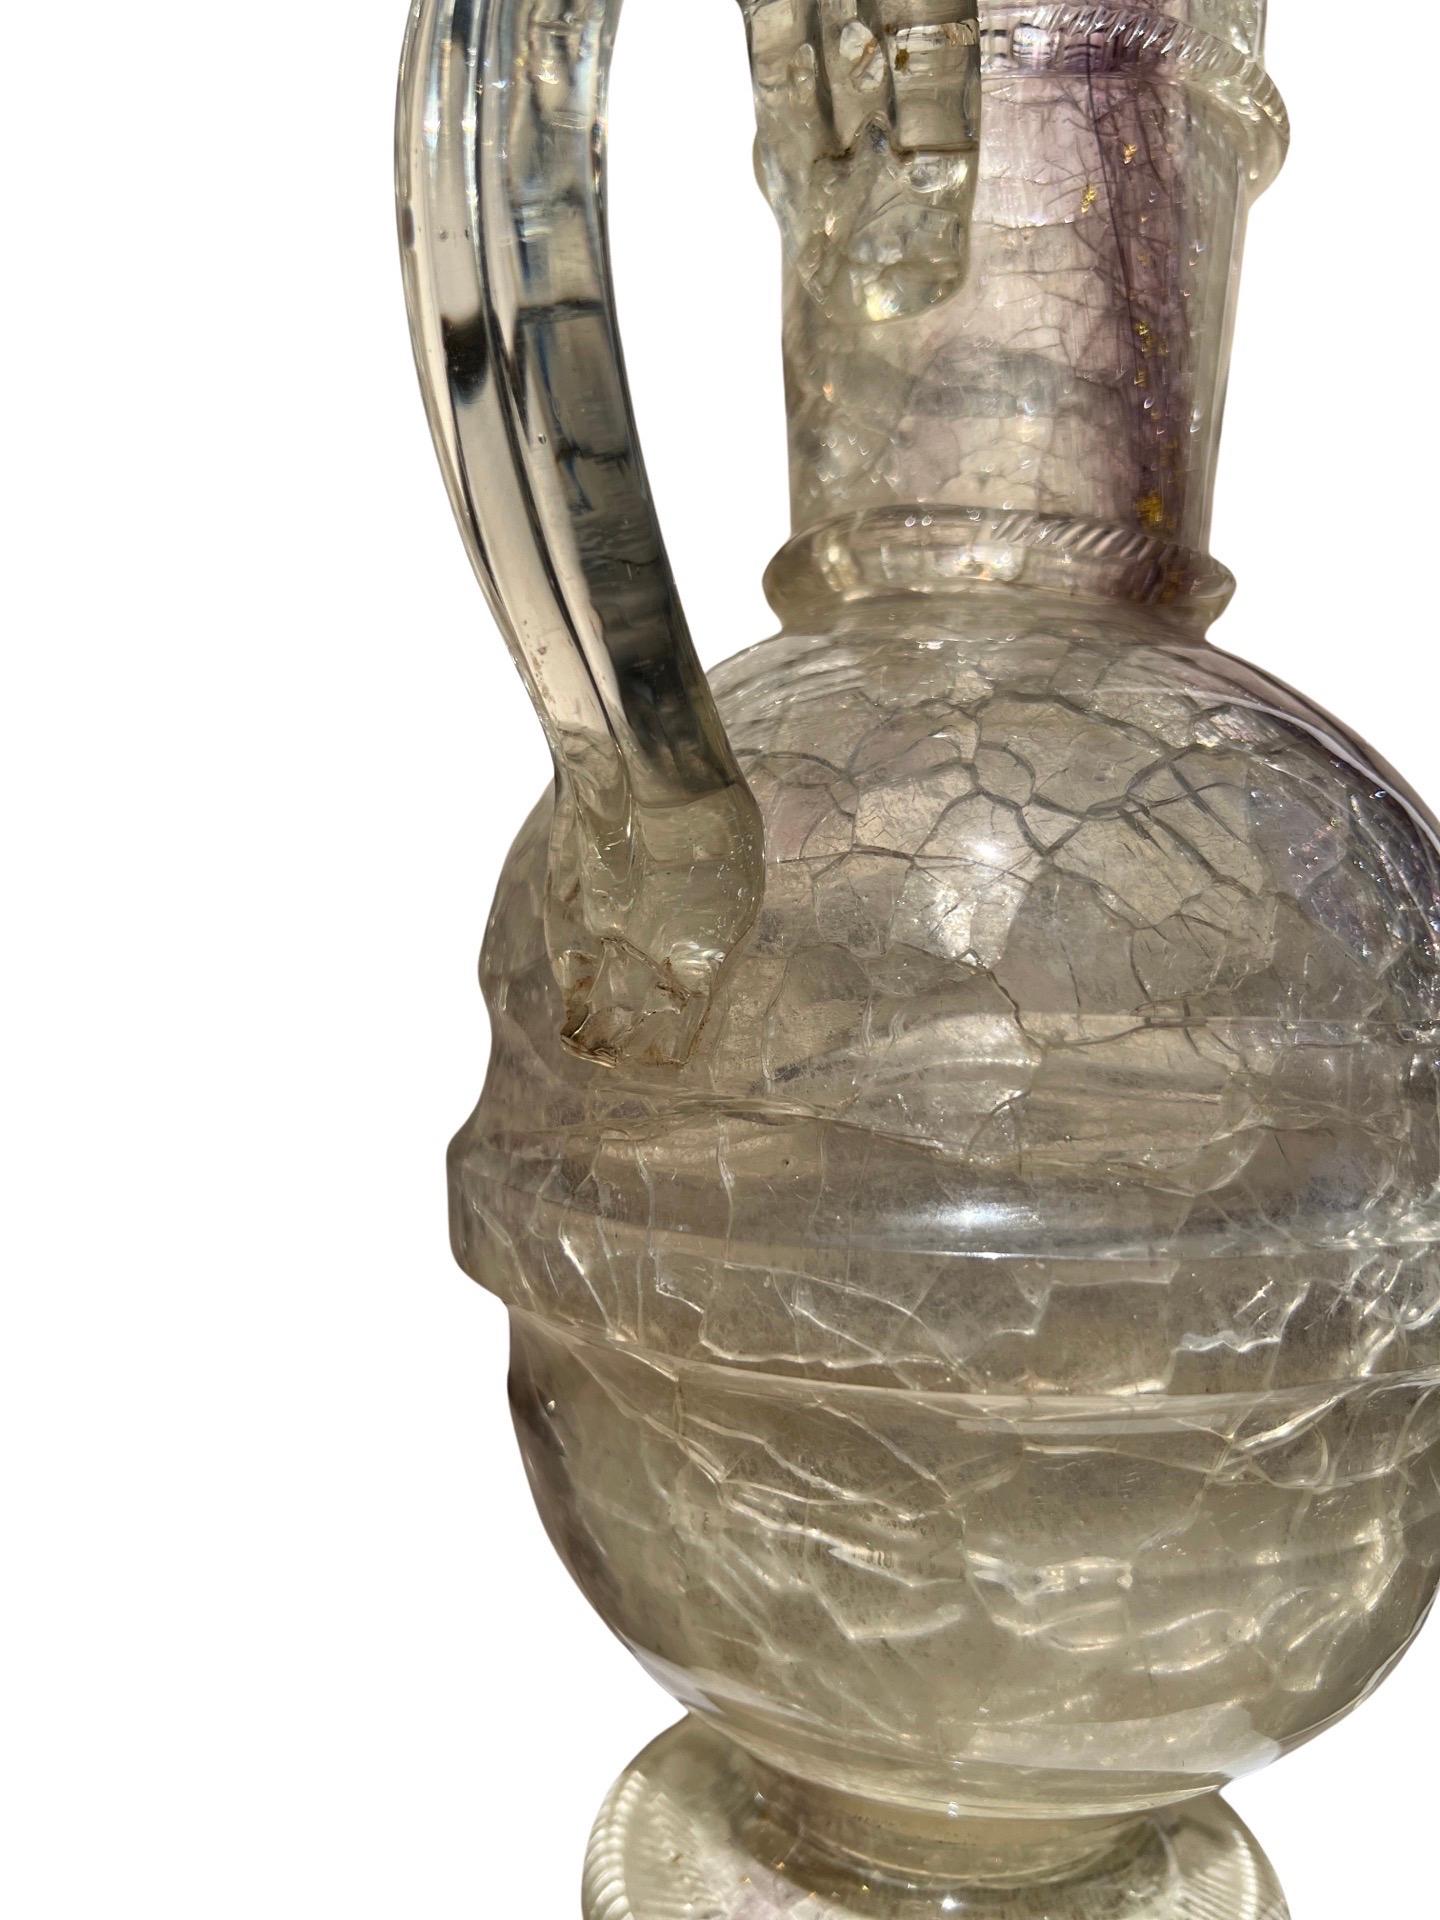 After The Roman Antique - Rock Crystal, Glass & Gold Flecking Grand Tour Pitcher In Good Condition For Sale In Atlanta, GA